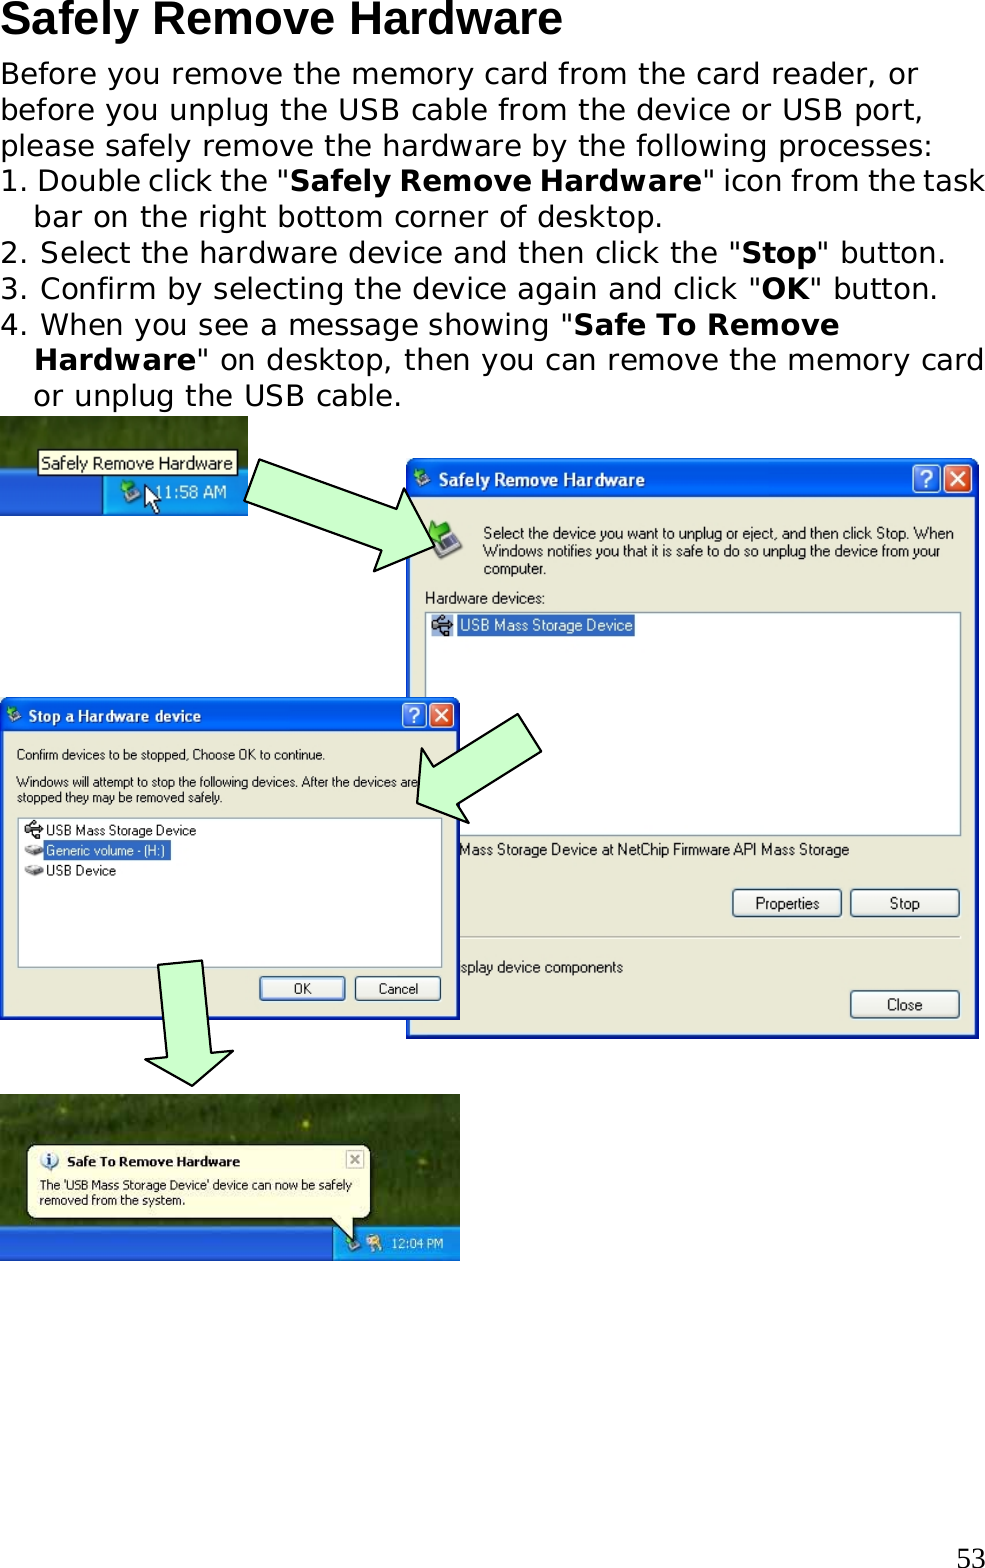  53Safely Remove Hardware Before you remove the memory card from the card reader, or before you unplug the USB cable from the device or USB port, please safely remove the hardware by the following processes: 1. Double click the &quot;Safely Remove Hardware&quot; icon from the task bar on the right bottom corner of desktop. 2. Select the hardware device and then click the &quot;Stop&quot; button. 3. Confirm by selecting the device again and click &quot;OK&quot; button. 4. When you see a message showing &quot;Safe To Remove Hardware&quot; on desktop, then you can remove the memory card or unplug the USB cable.                 